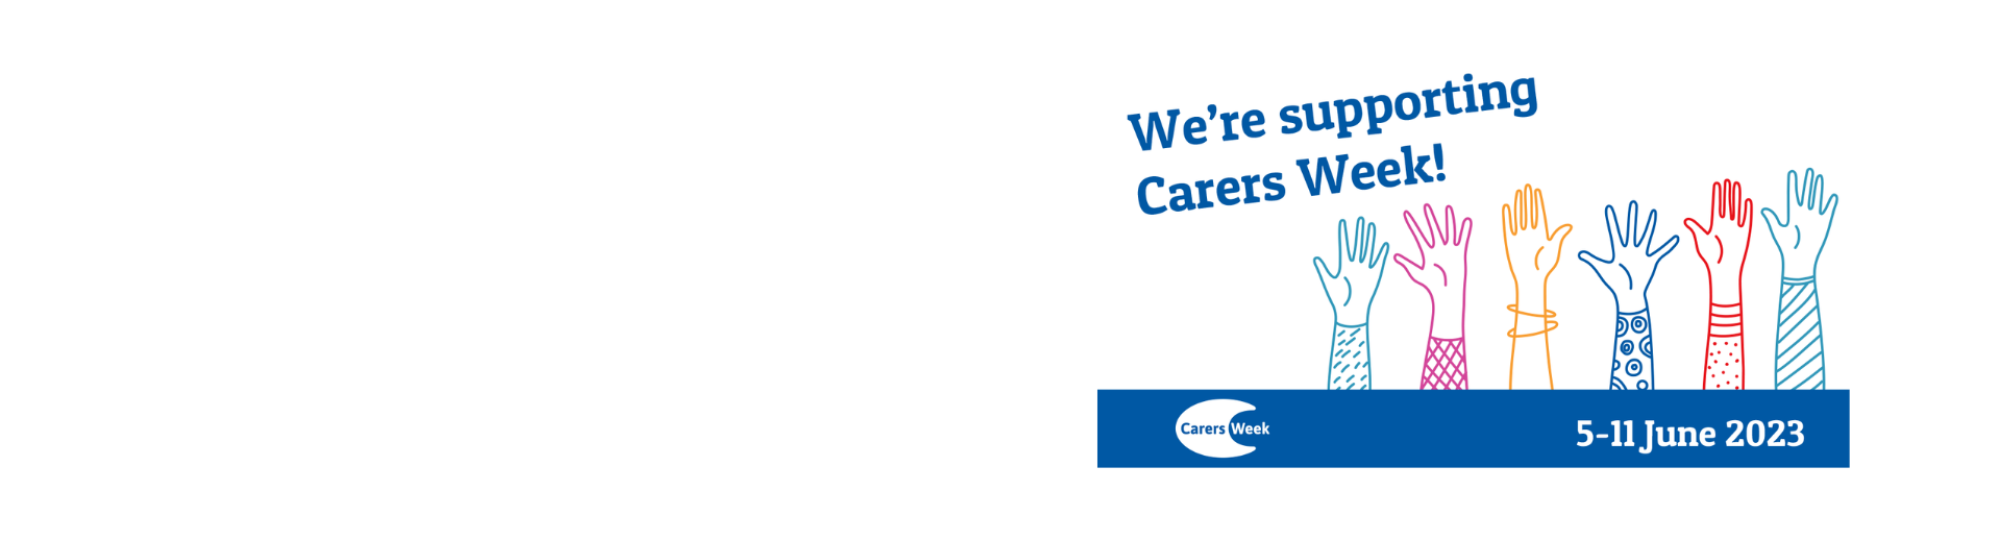 Carersweeksupport